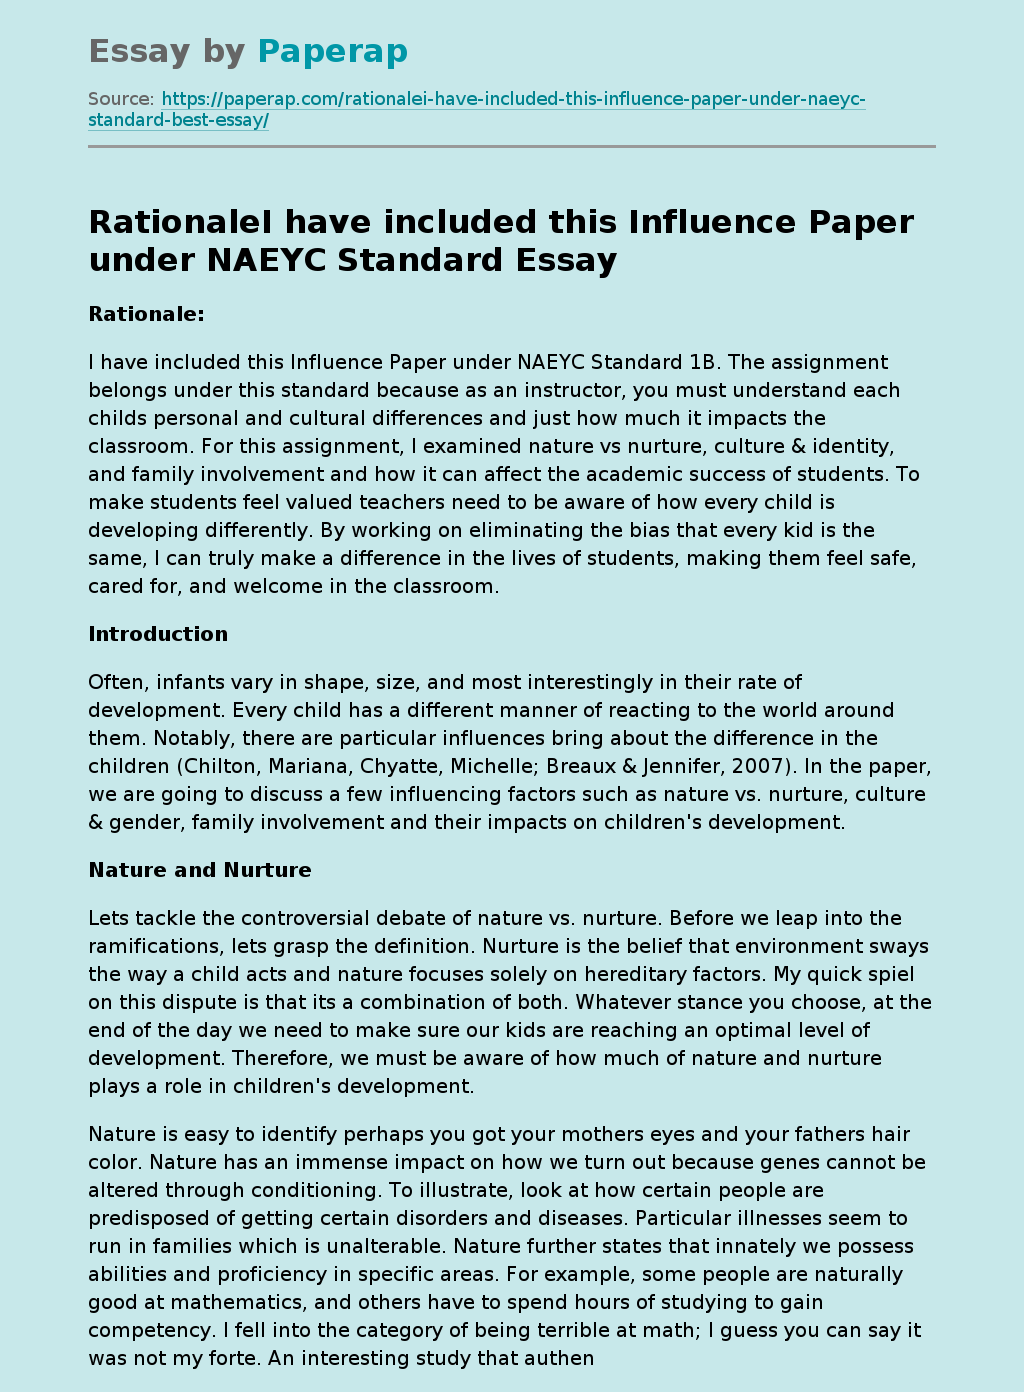 RationaleI have included this Influence Paper under NAEYC Standard